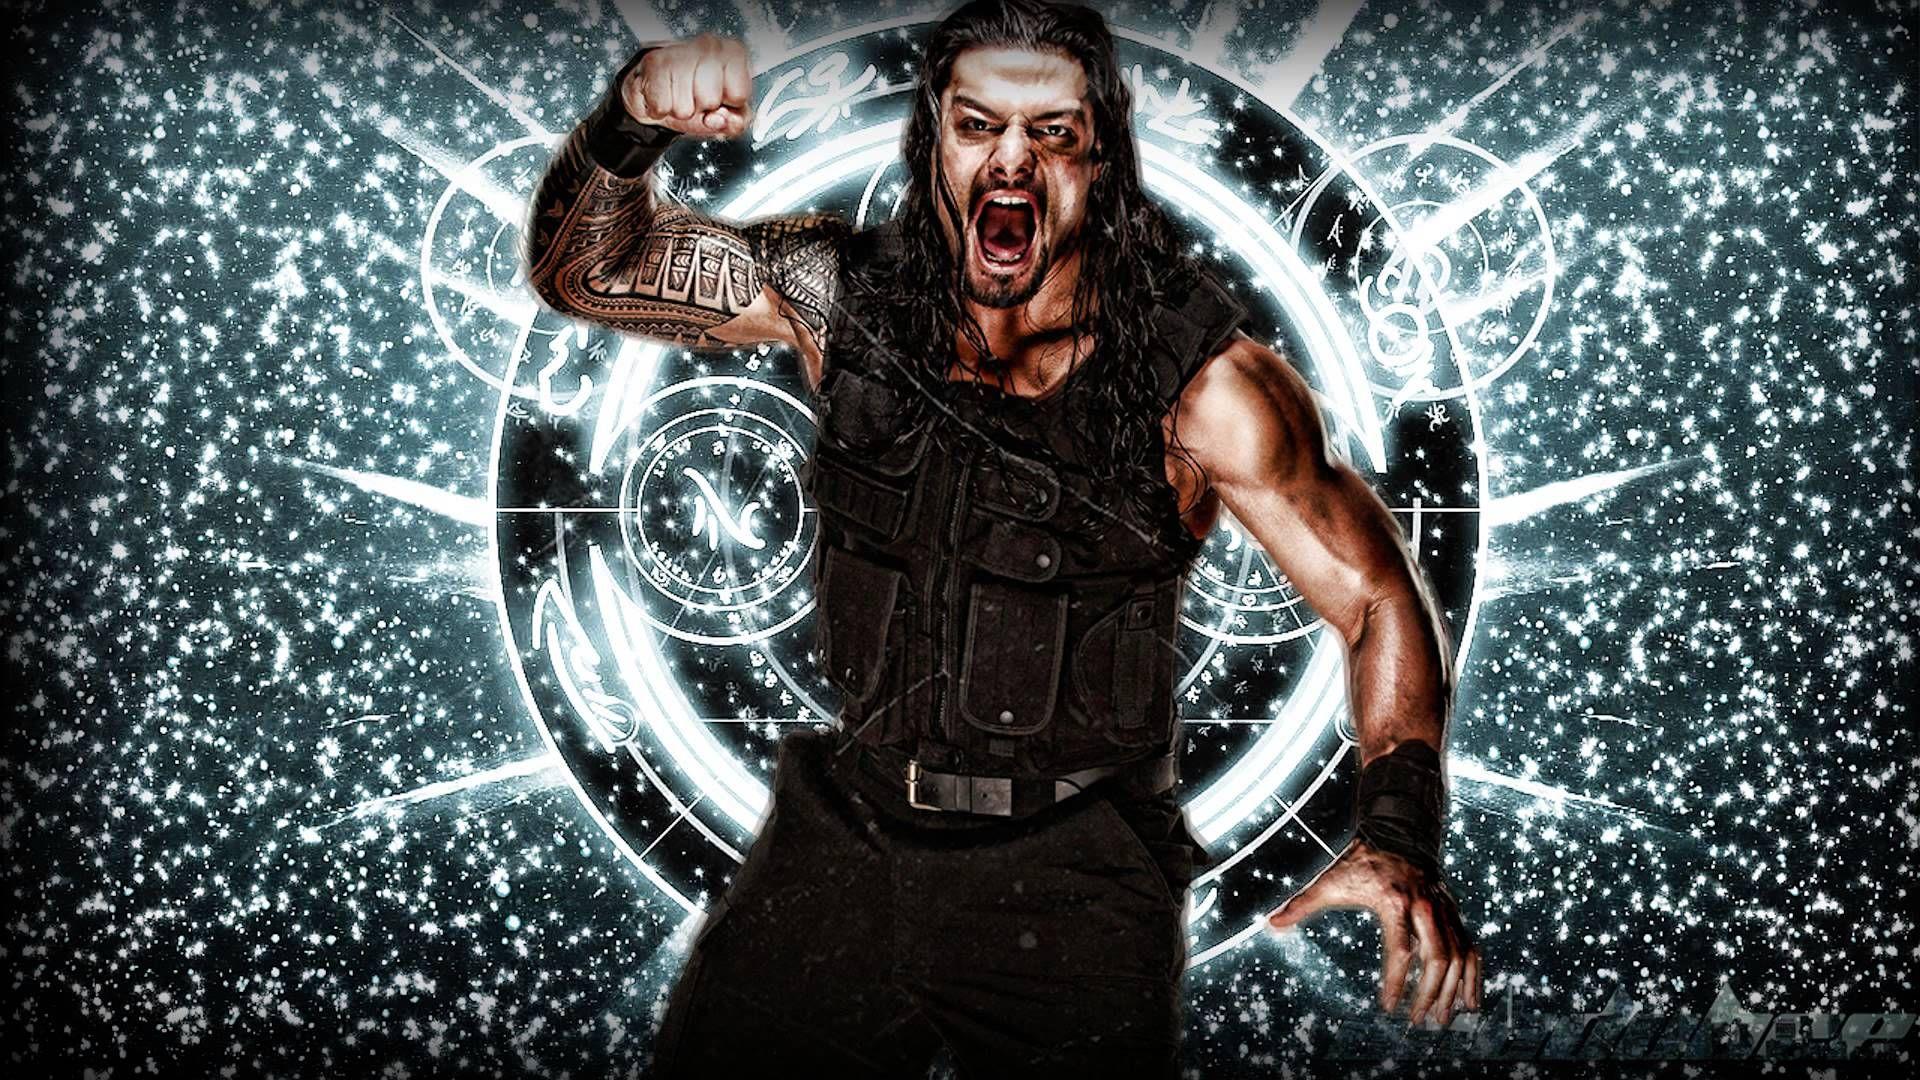 roman reigns logo reigns, Roman reigns logo, Roman reigns superman punch